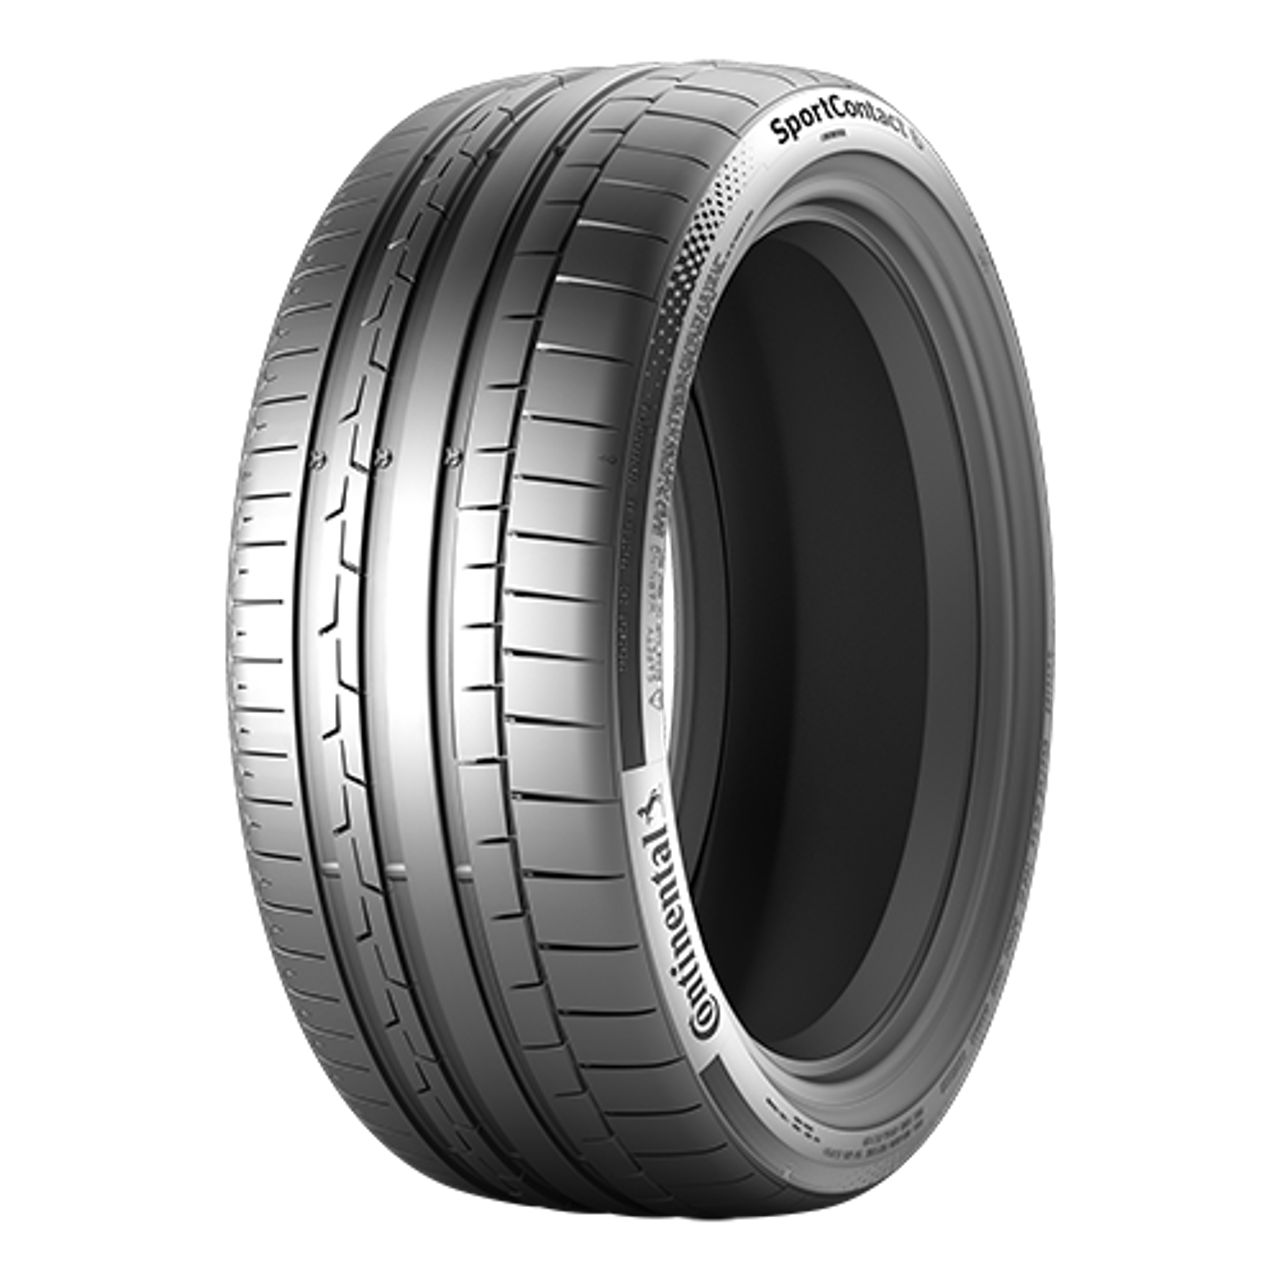 CONTINENTAL SPORTCONTACT 6 (RO1) (EVc) 255/35R19 96Y FR